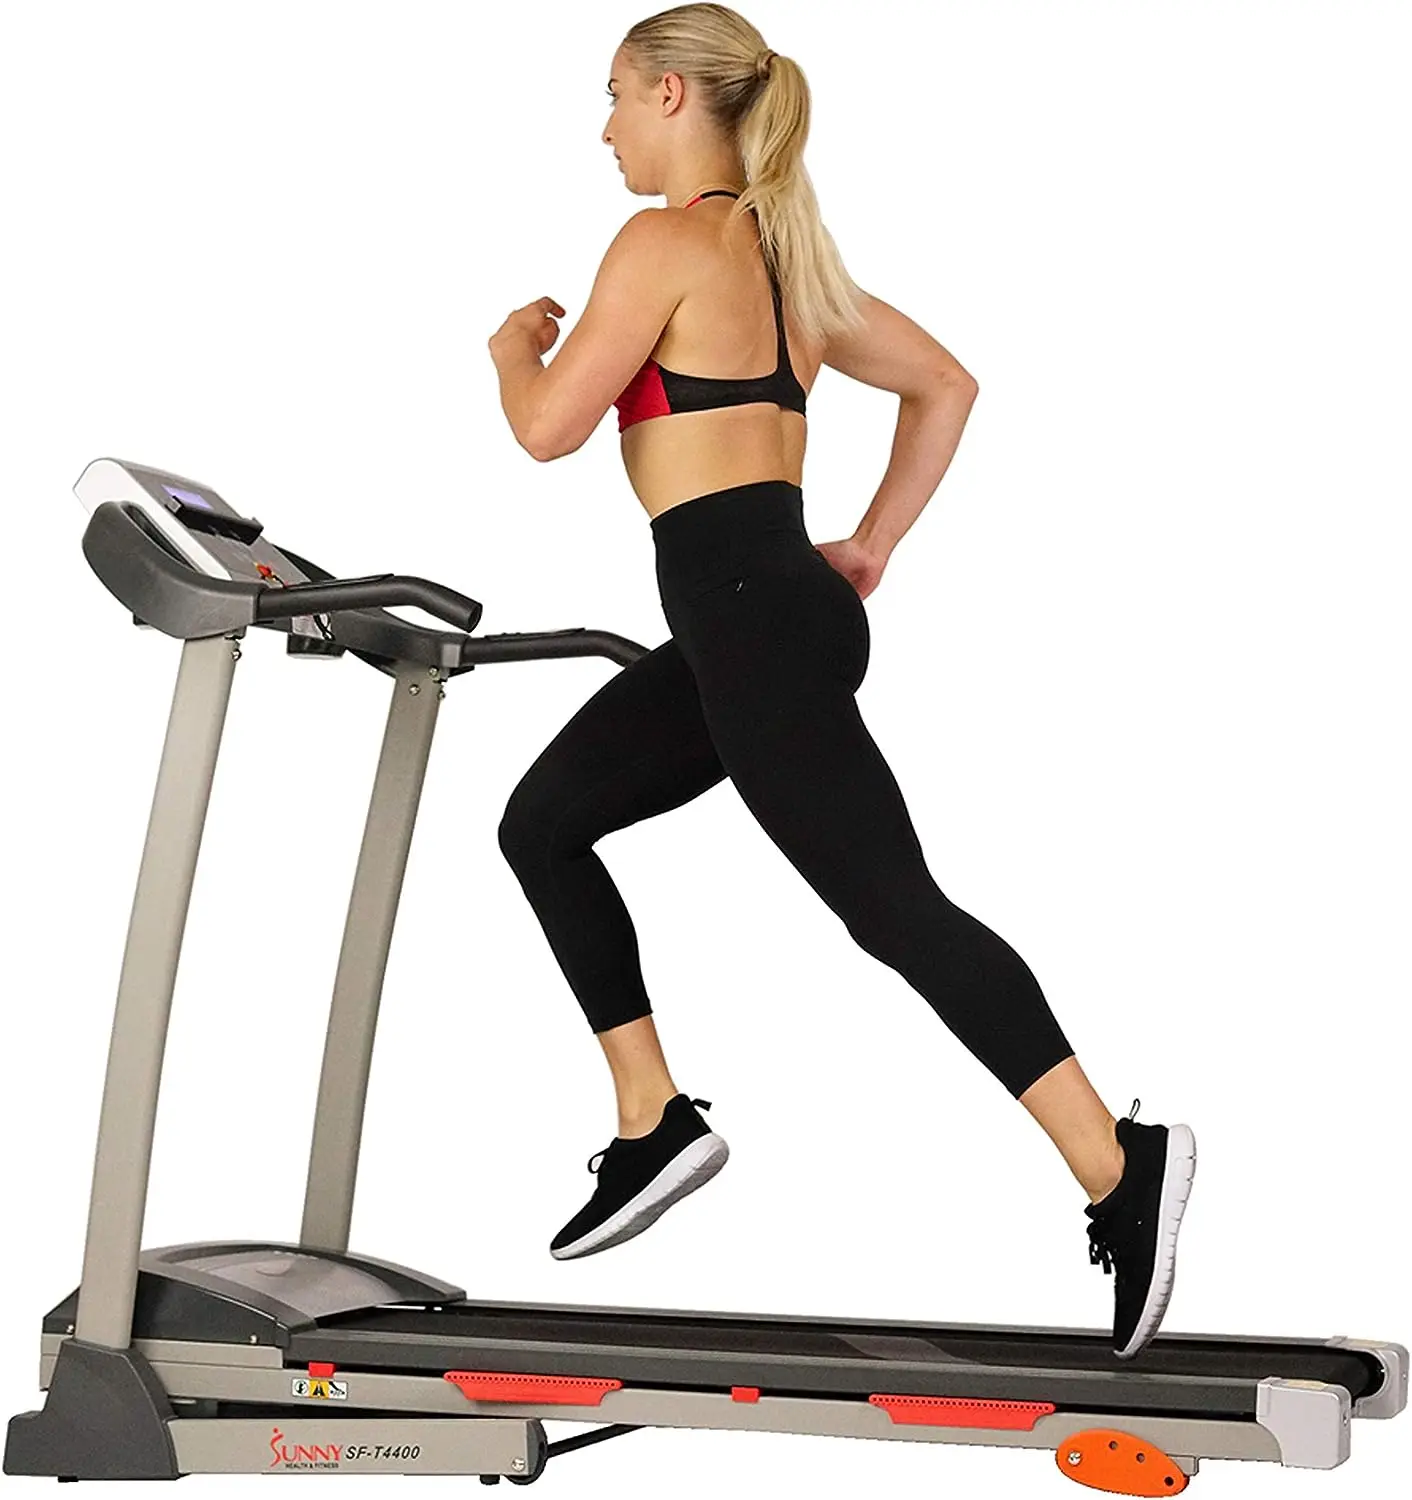 

Fitness Premium Folding Incline Treadmill with Pulse Sensors, One-Touch Speed Buttons, Shock Absorption, Optional Bluetooth